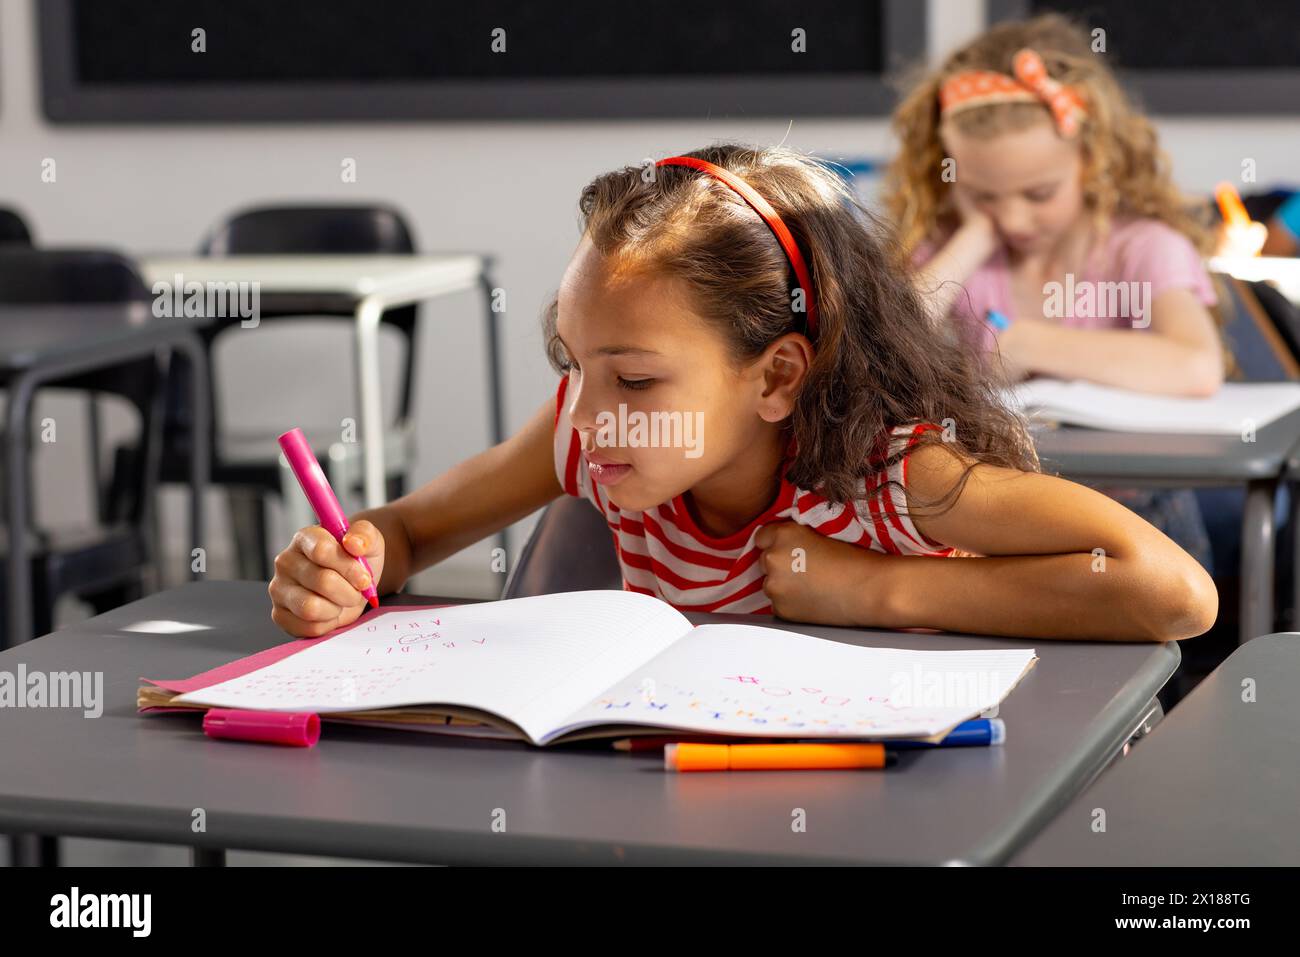 In school, young biracial female student concentrating on writing in the classroom Stock Photo